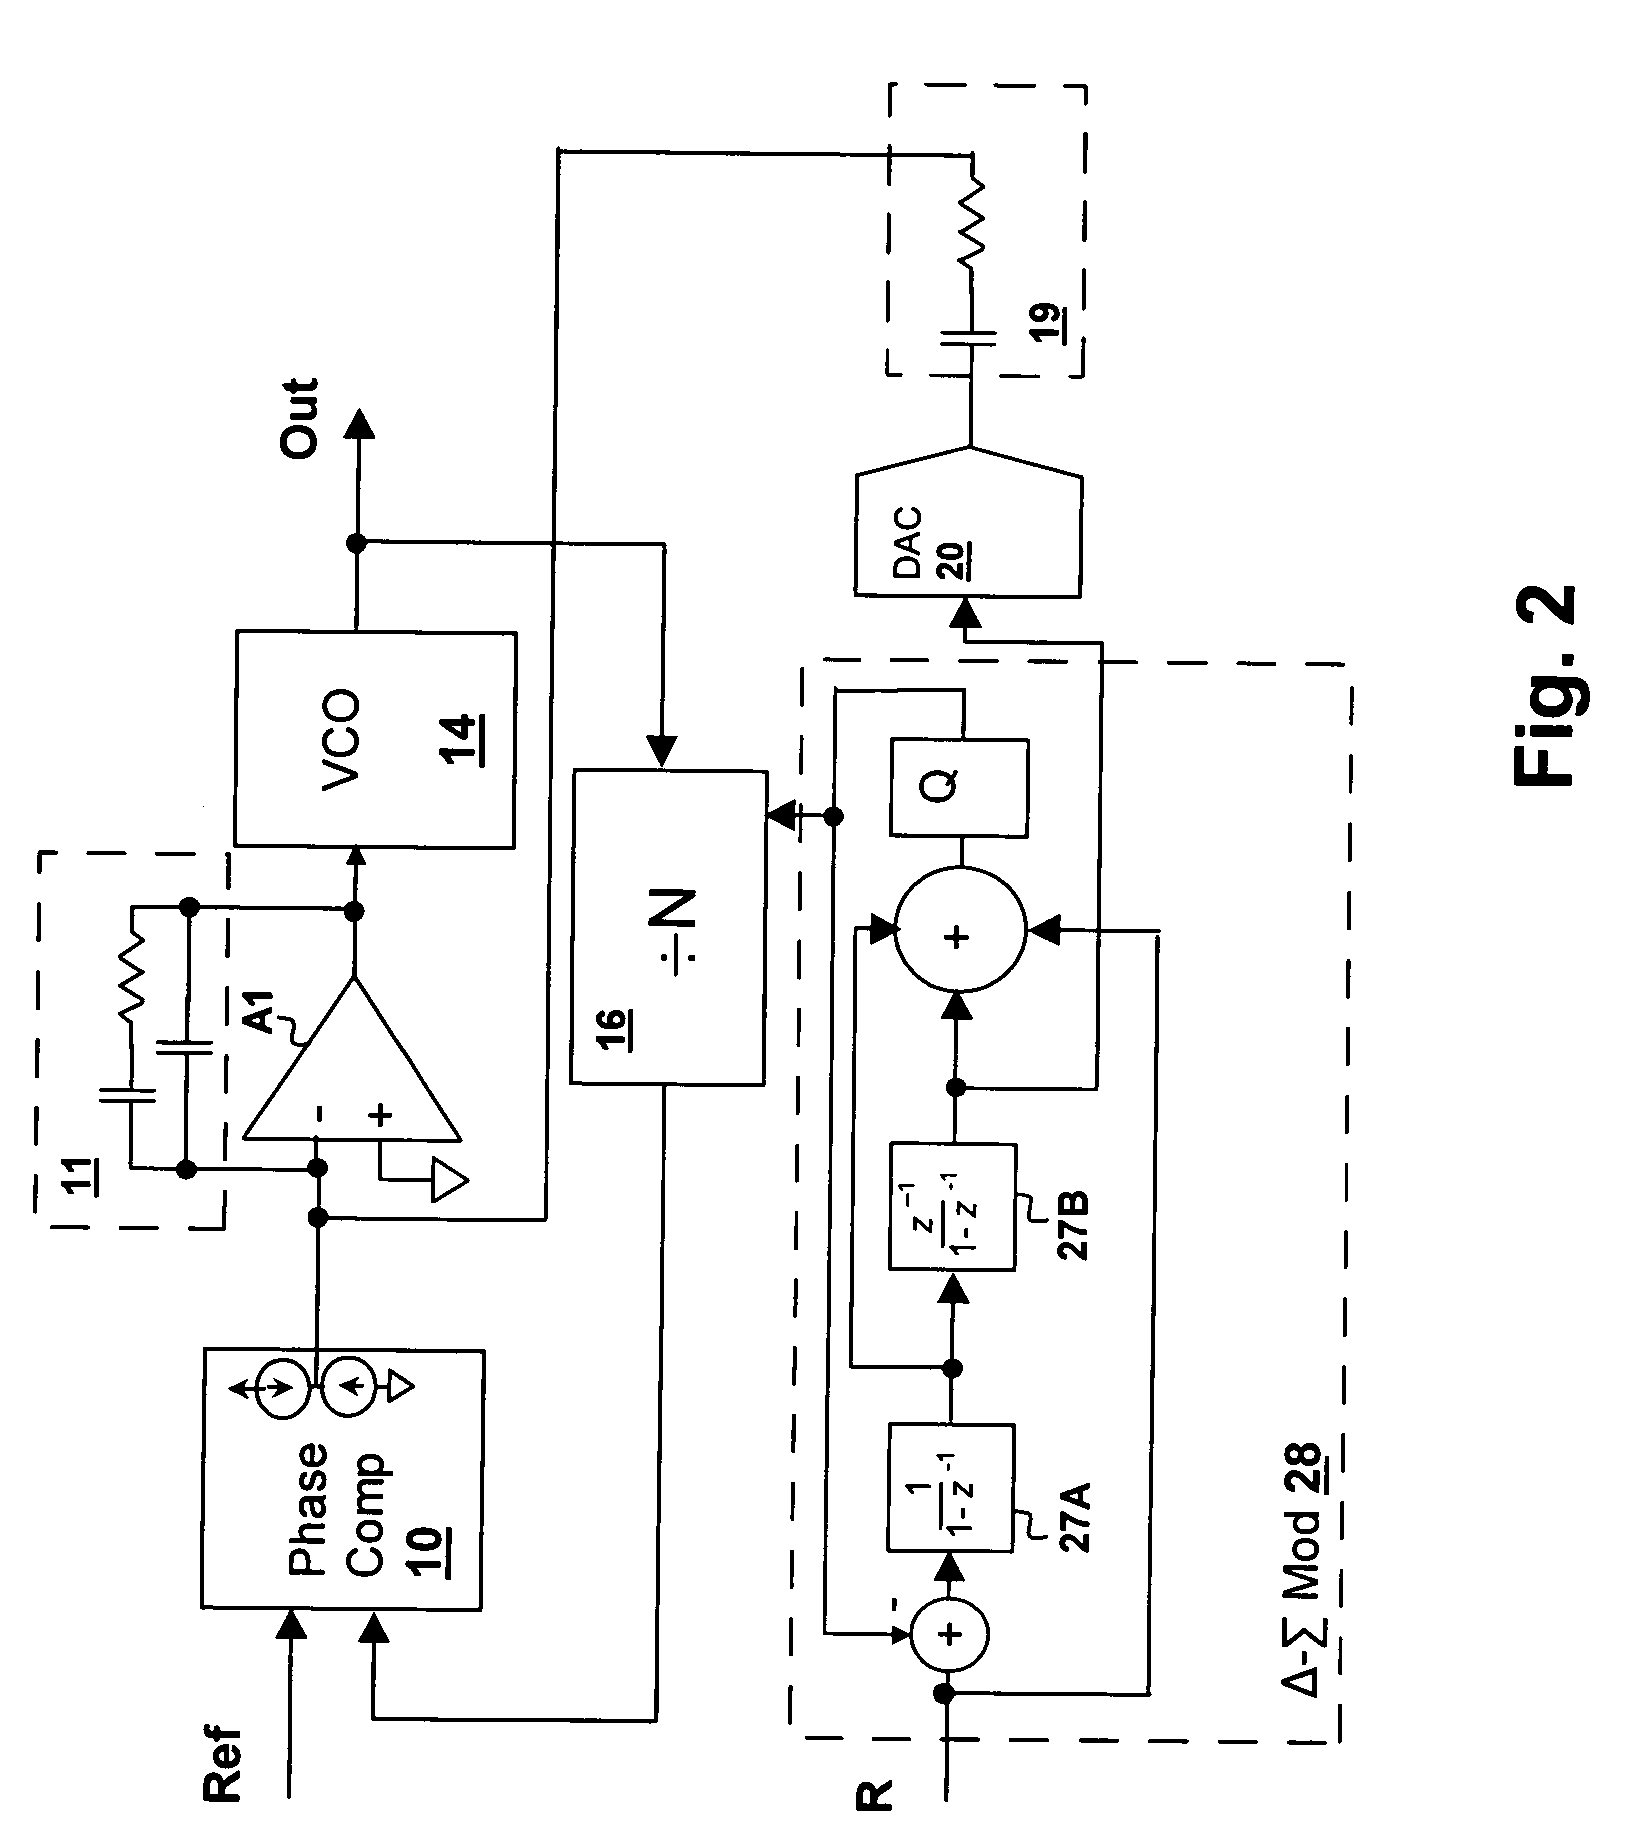 Method and apparatus for canceling jitter in a fractional-N phase-lock loop (PLL)